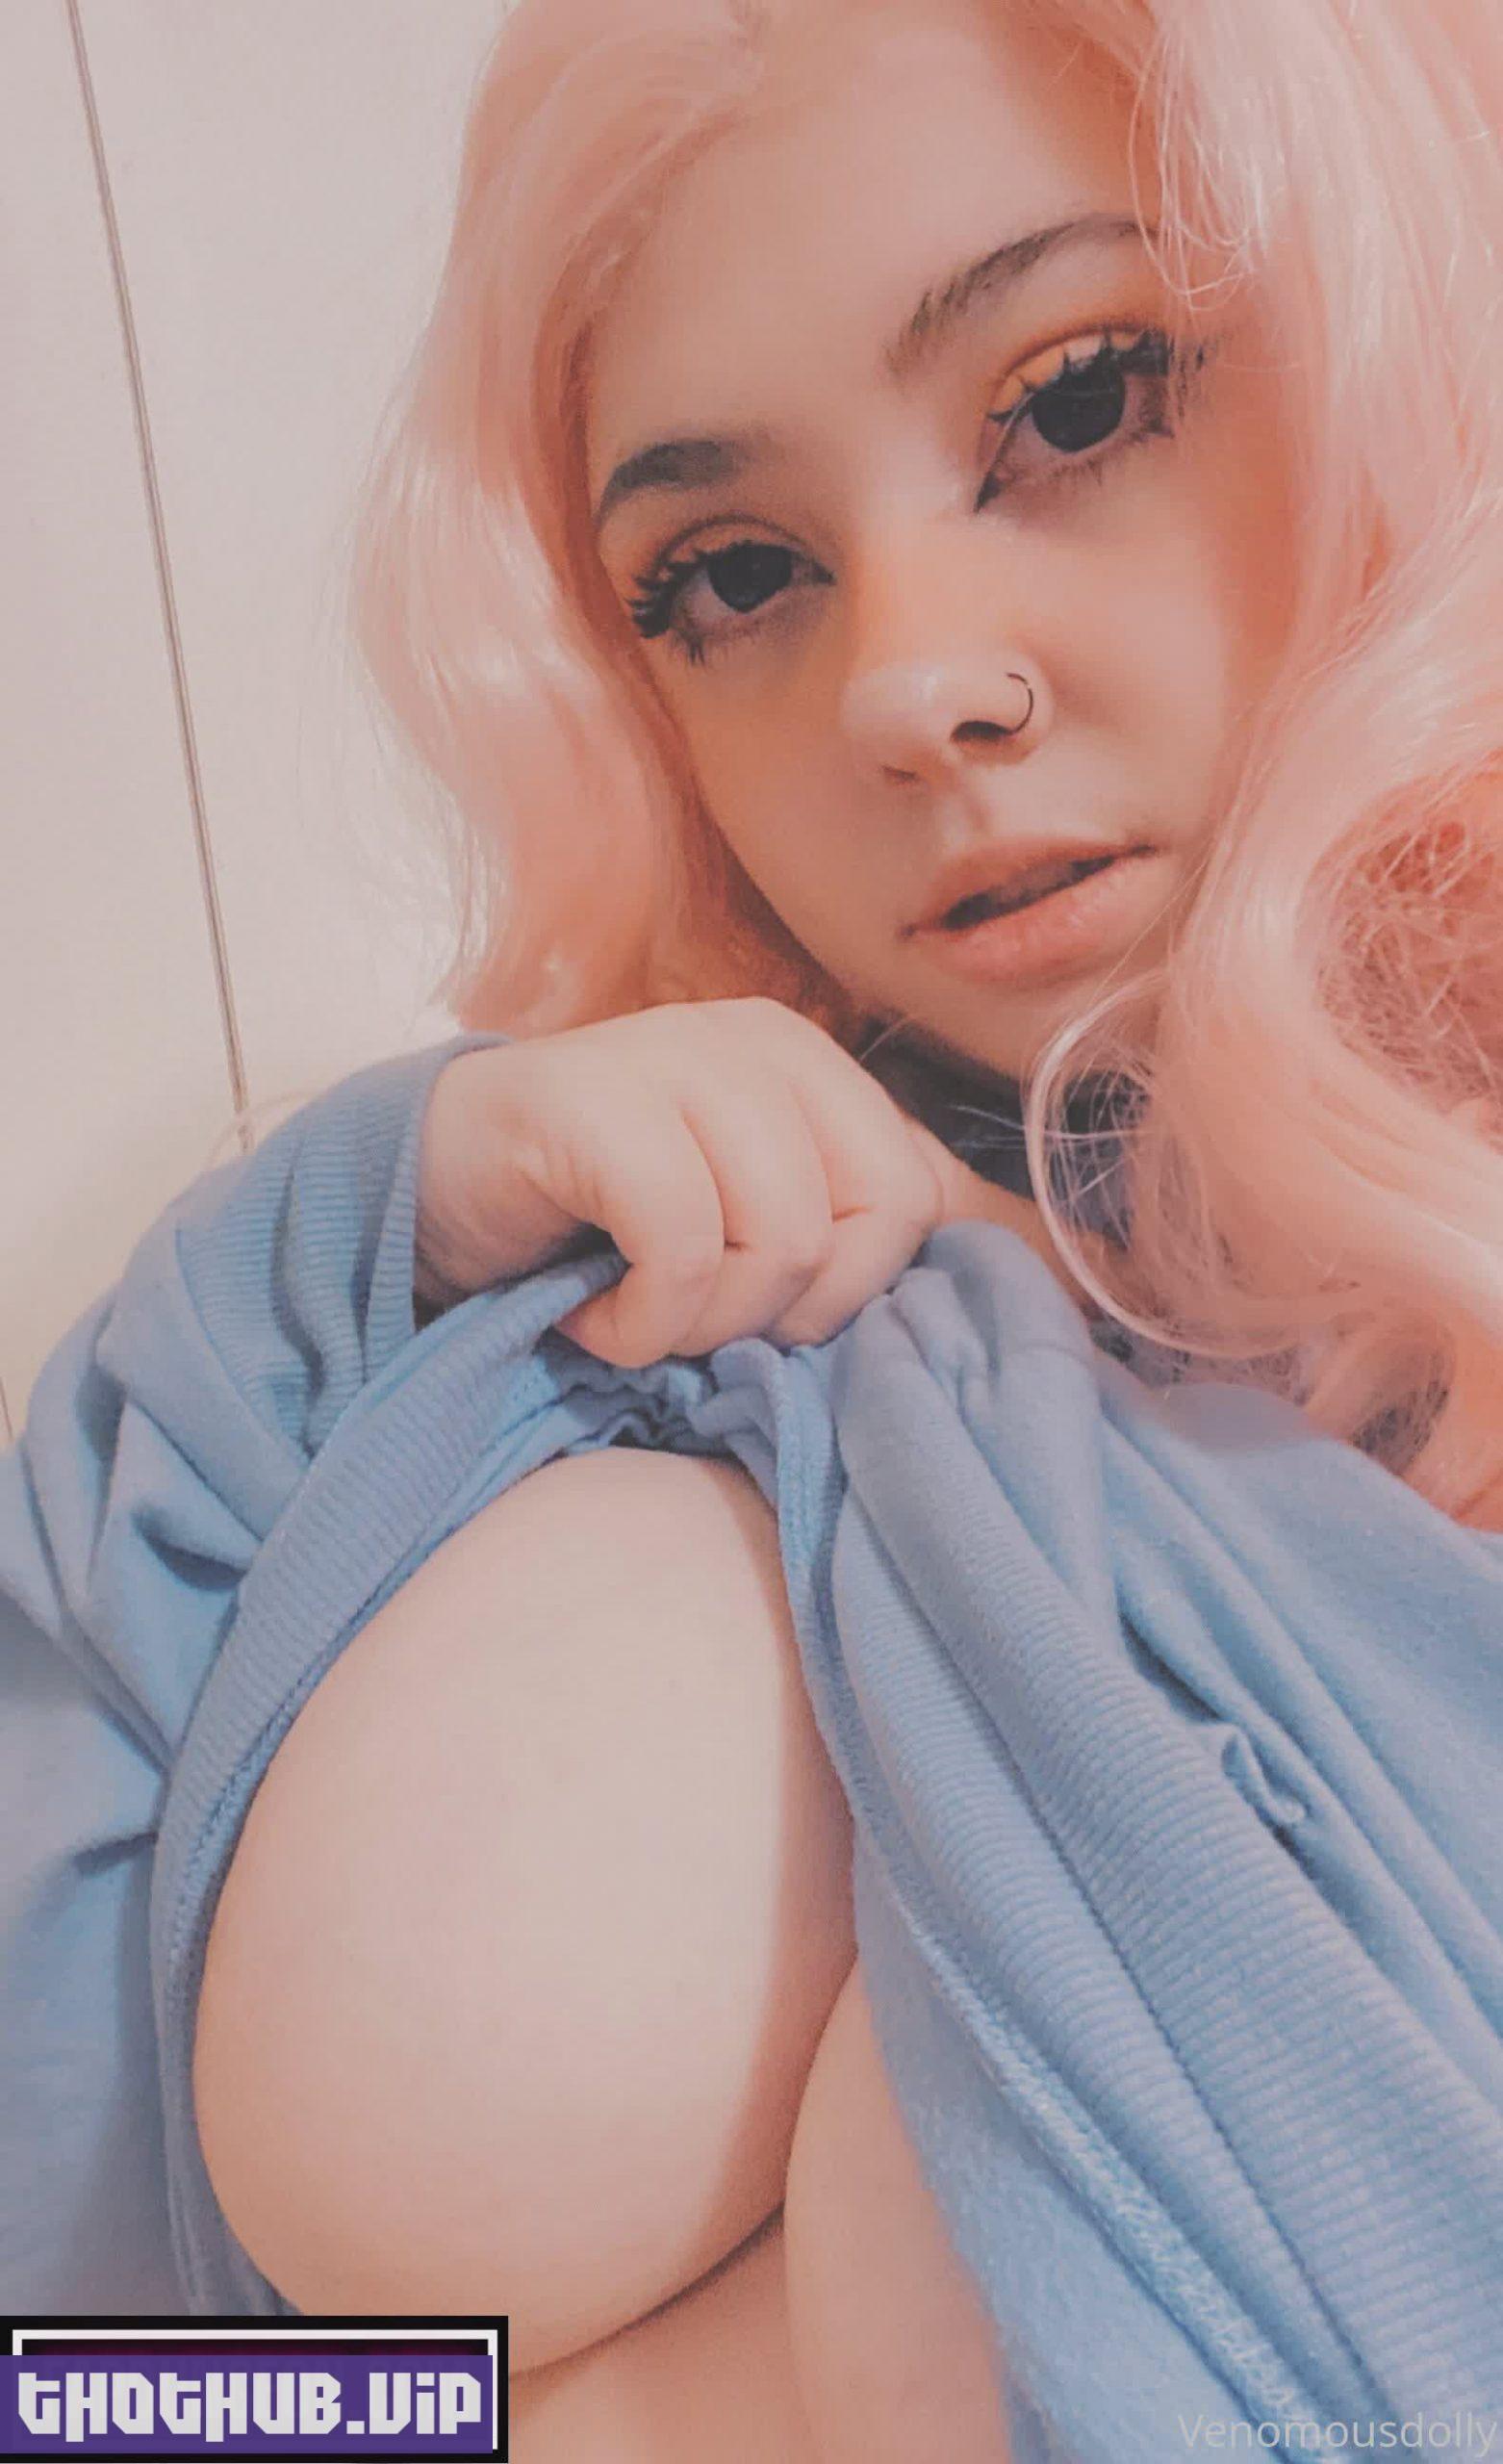 1705959206 475 Venomous dolly %E2%80%93 Thick Cosplay Slut Onlyfans Nudes